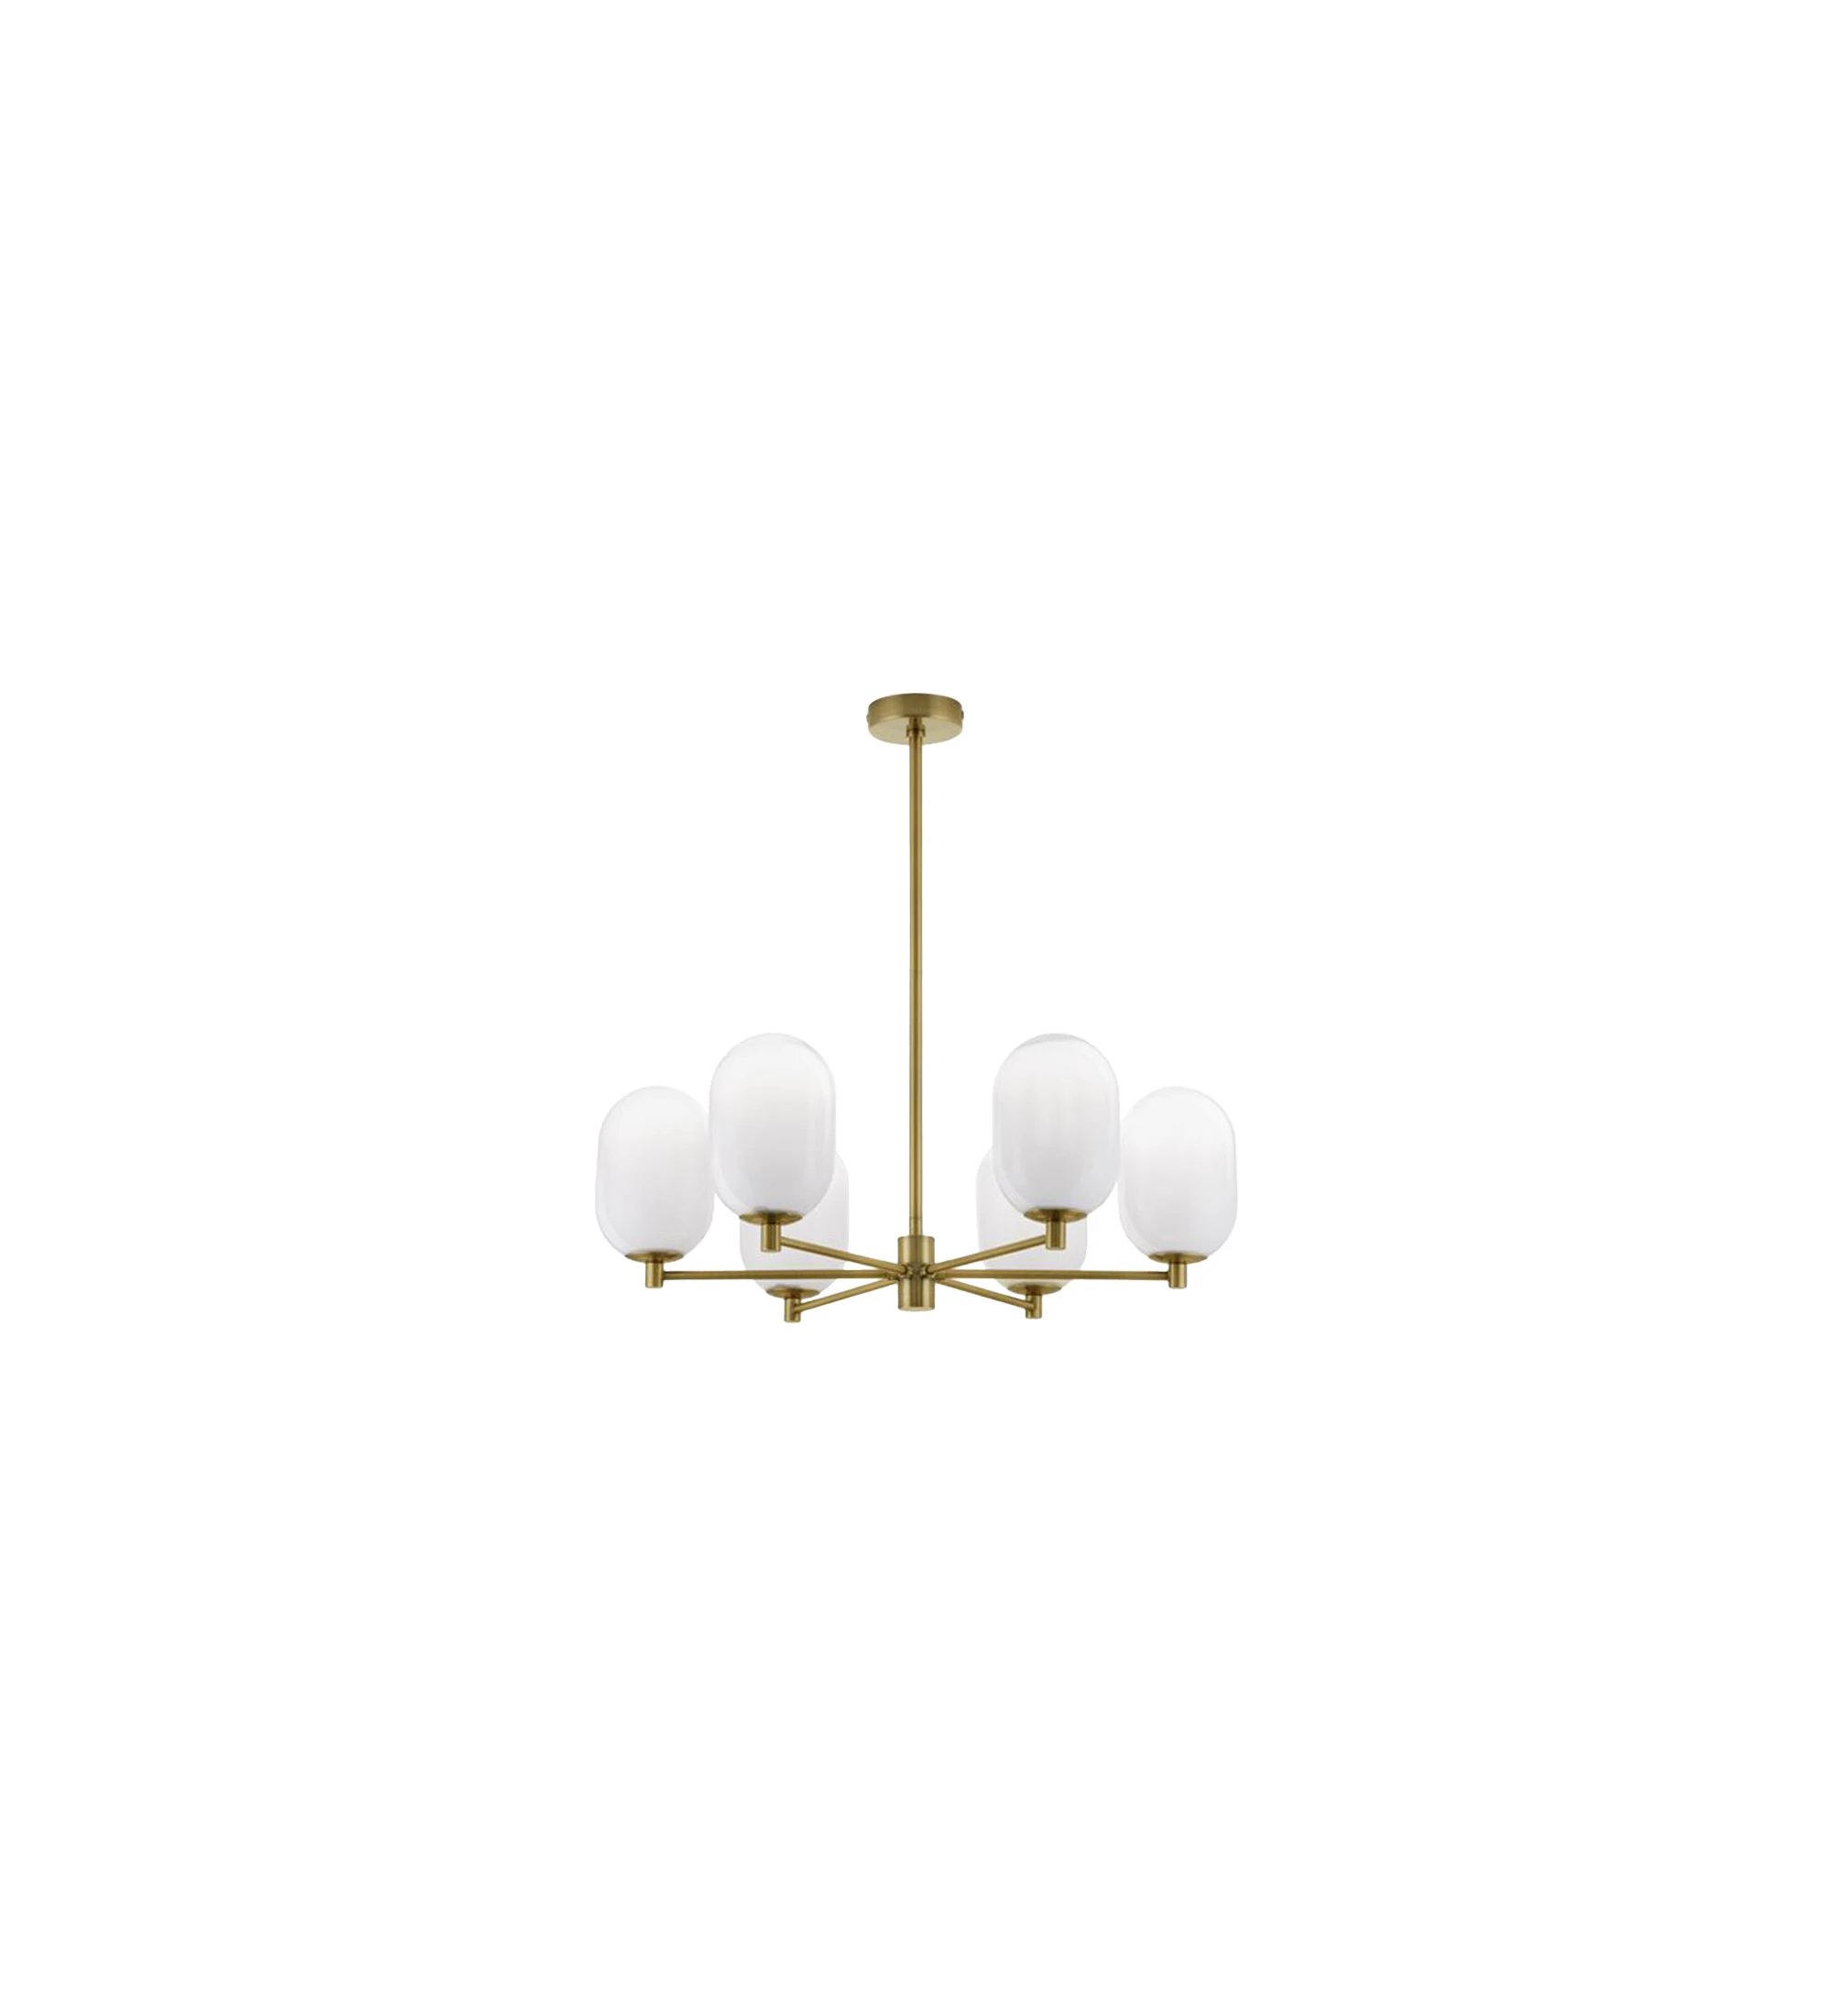  Suspension lamp in golden metal and frosted glass diffusers.